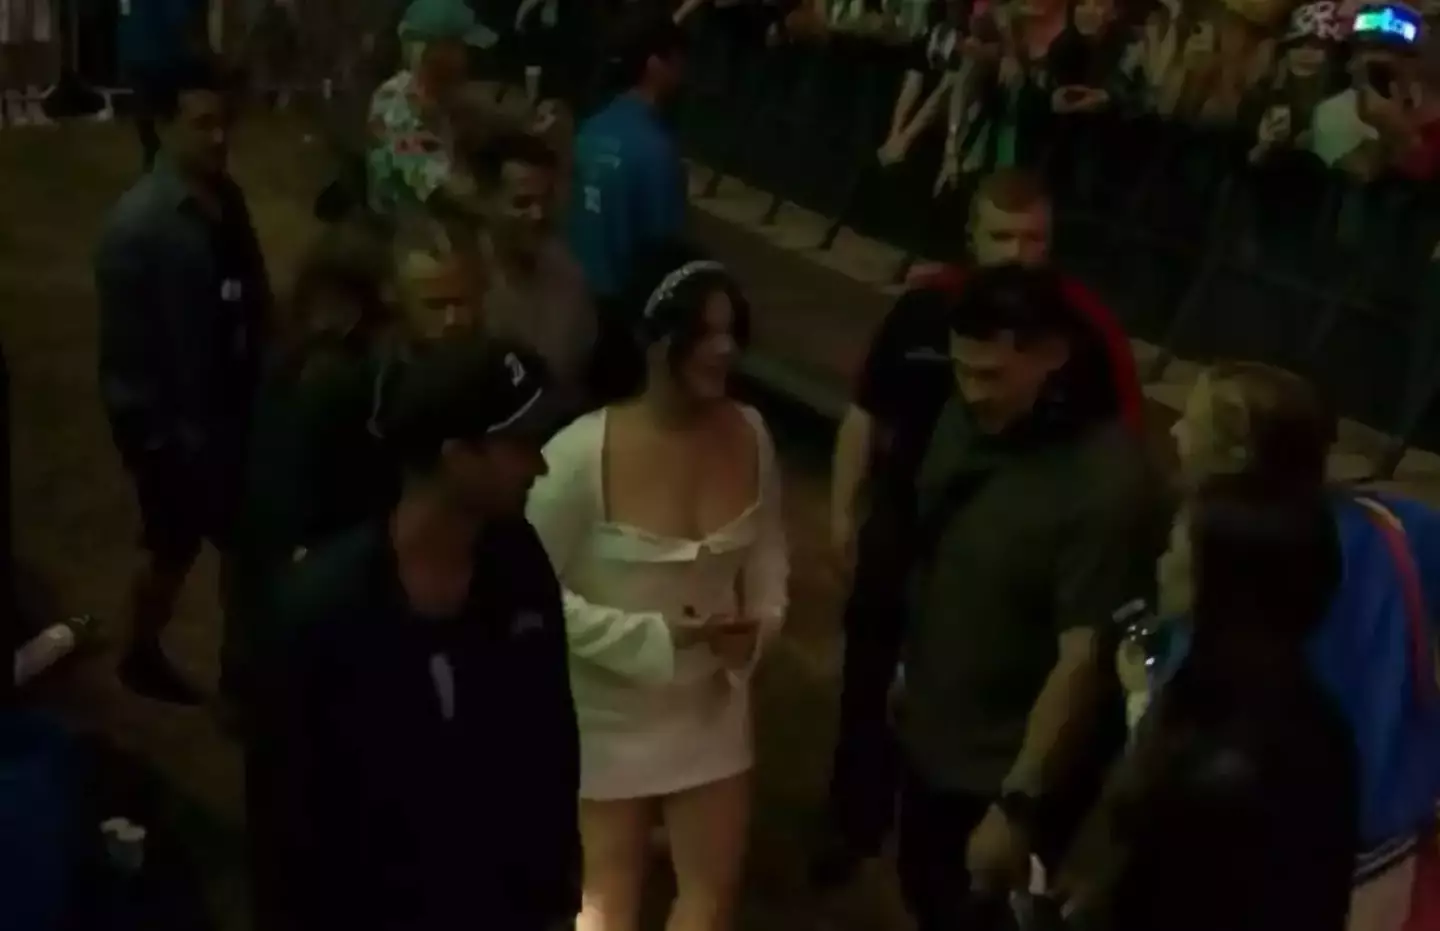 Lana Del Rey was escorted off by the Glastonbury security staff.